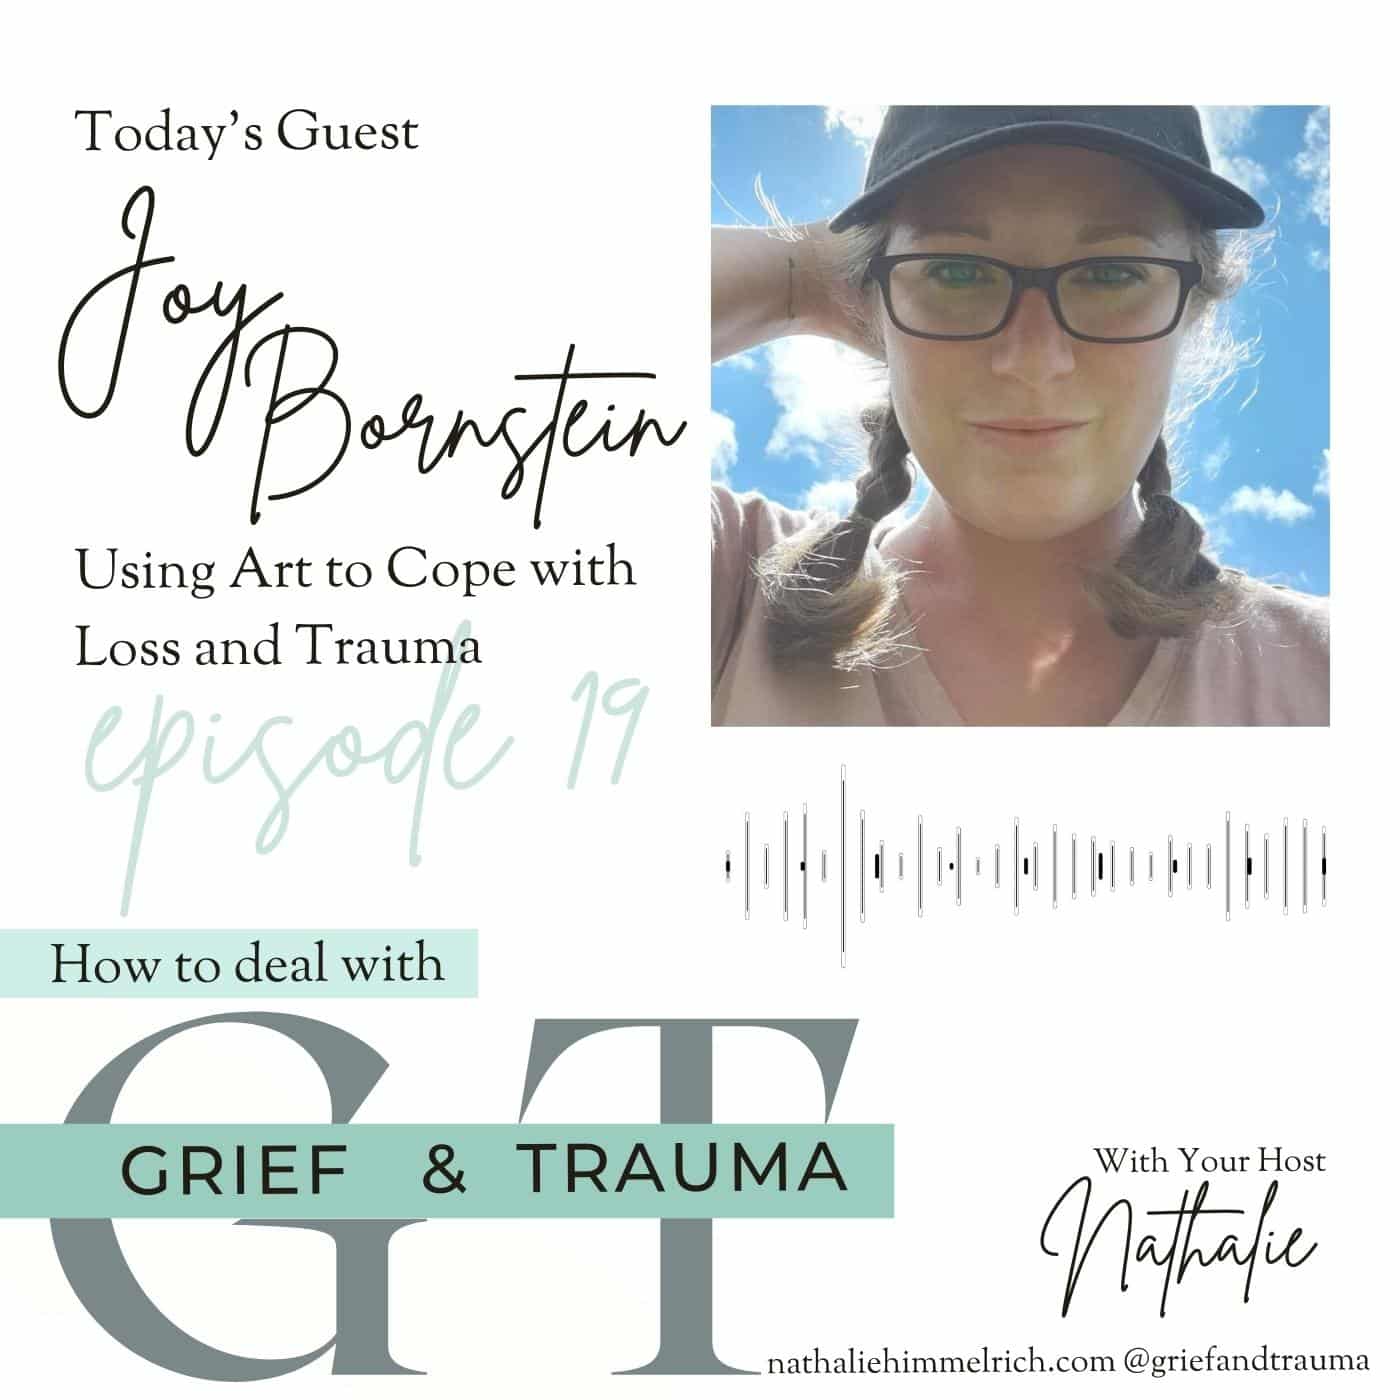 Nathalie with Joy Bornstein on Using Art to Cope with Loss and Trauma | Episode 19